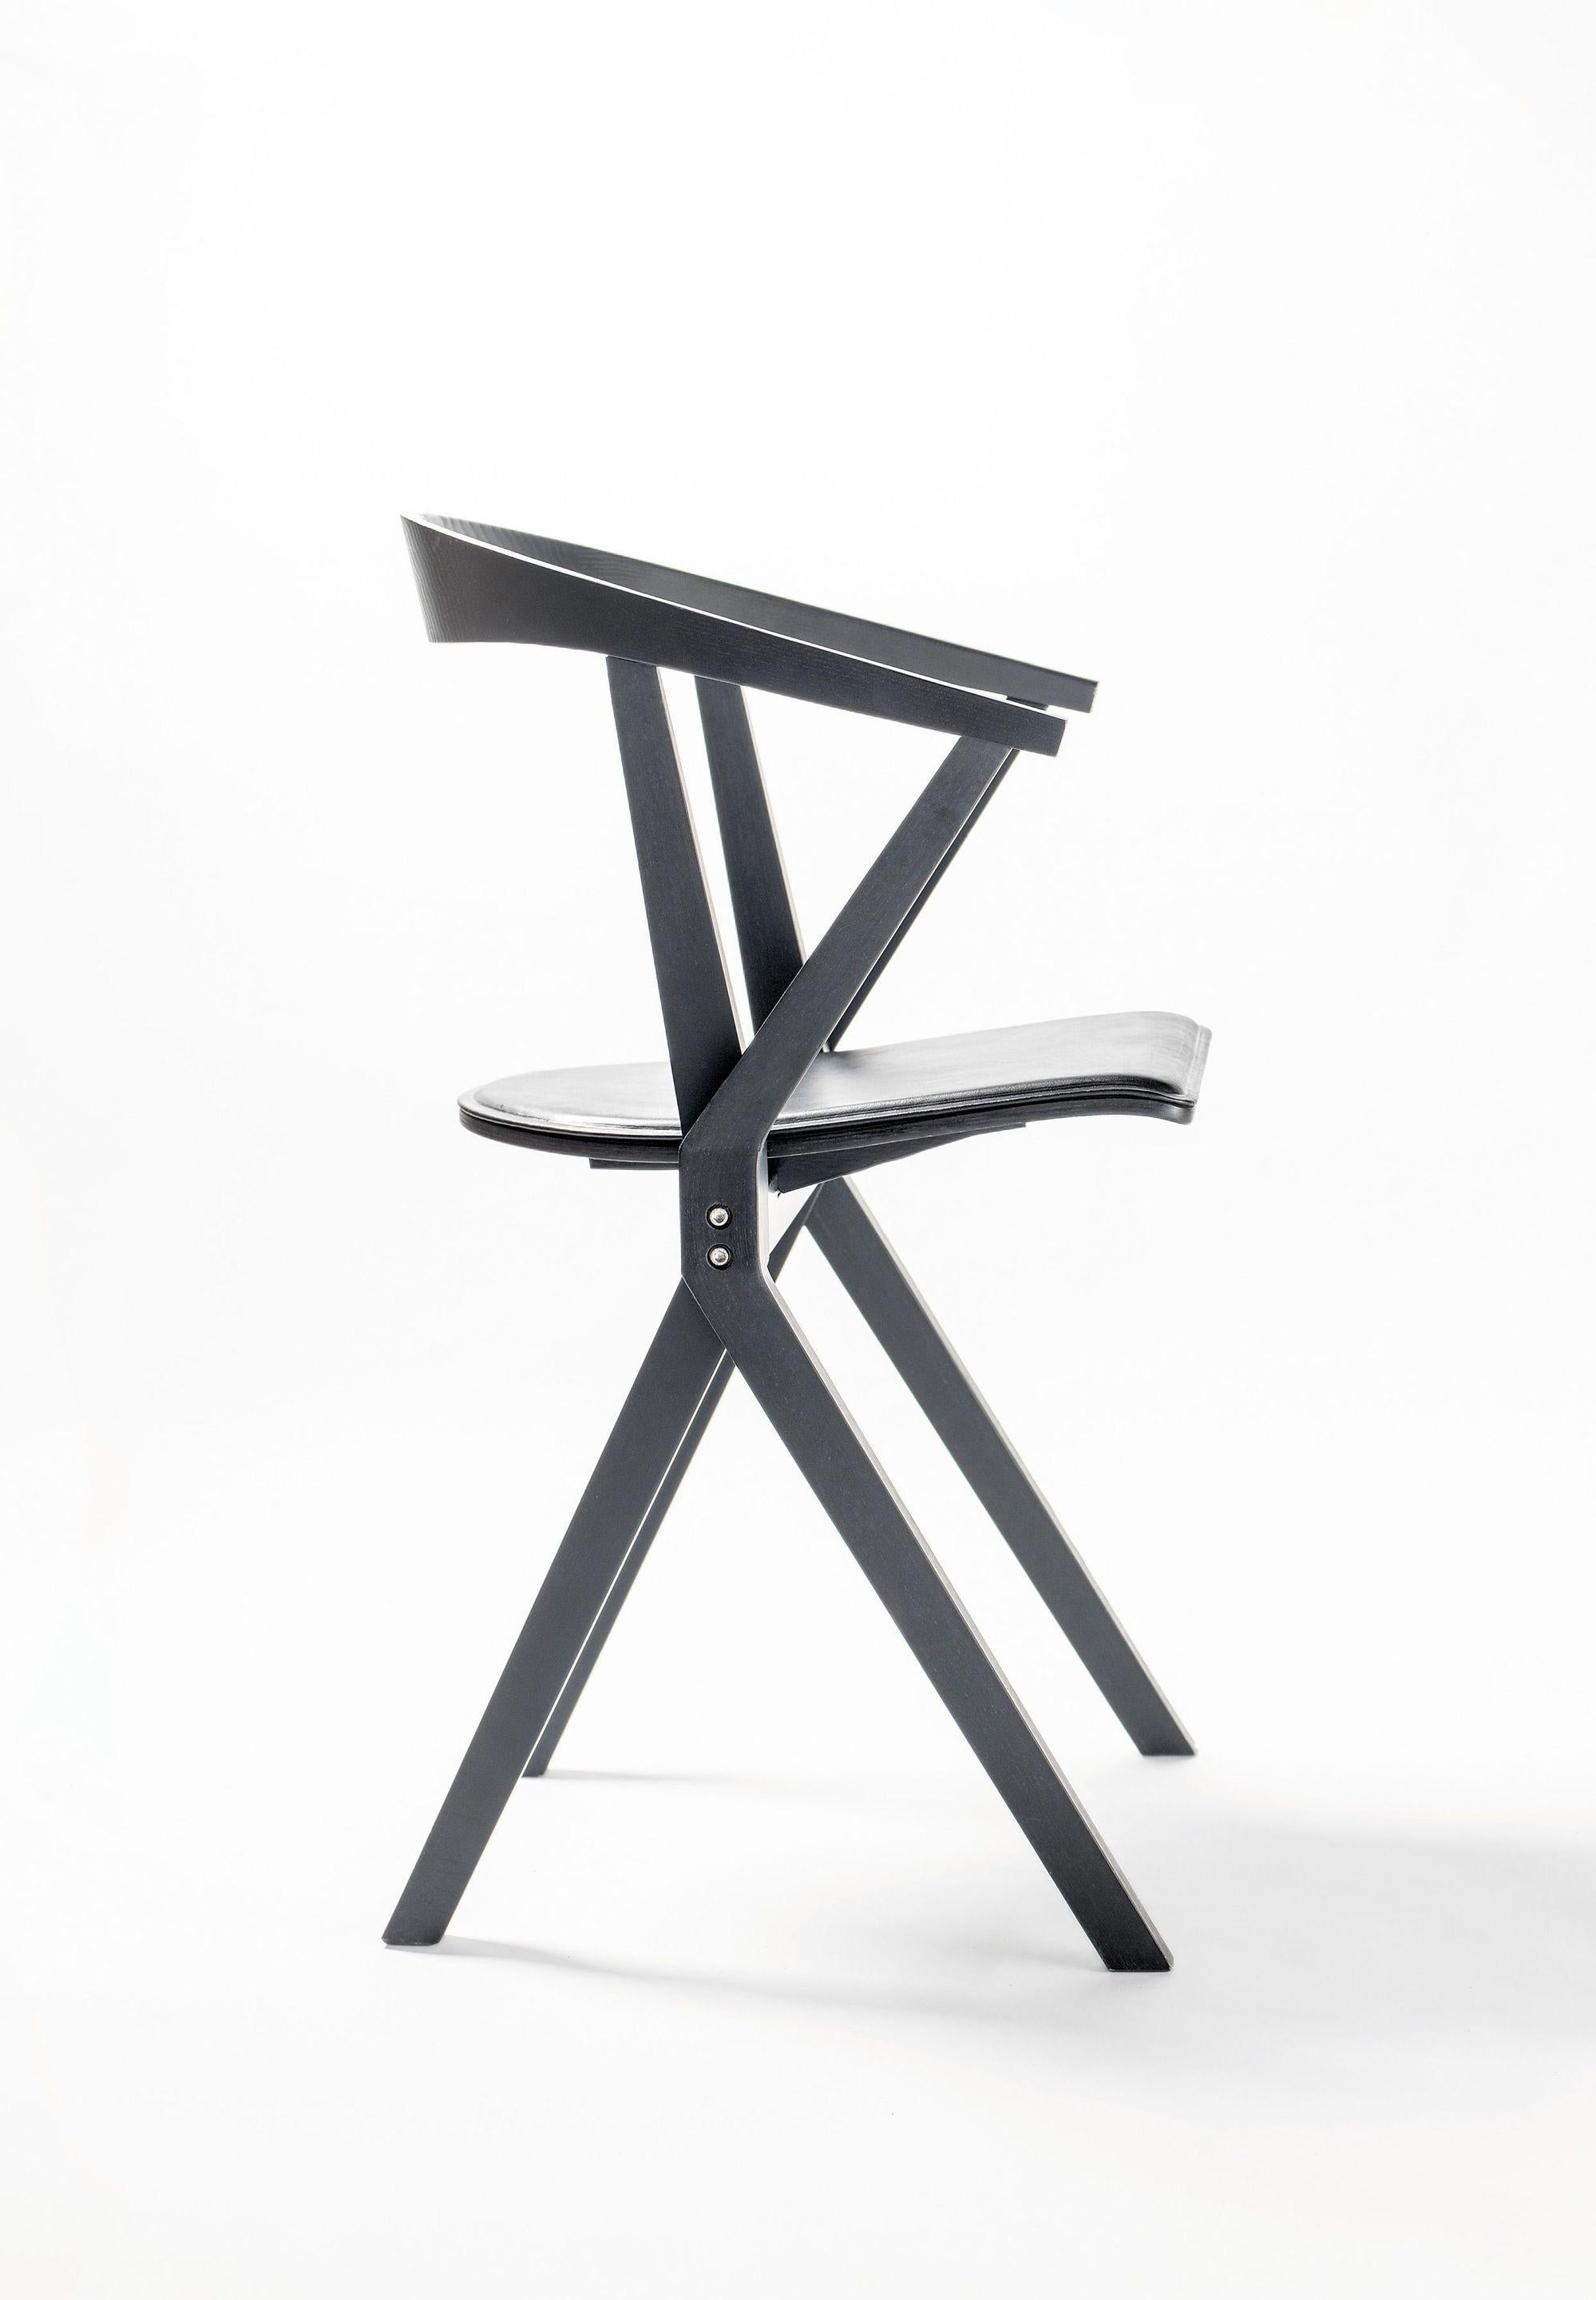 Chair B black lacquered ash by Konstantin Grcic
Dimensions: D 48 x W 56 x H 77 cm 
Materials: The lateral sides and upper side of the seat are made of veneered beech plywood. The underside is veneered in ash wood. The backrest is made of solid ash